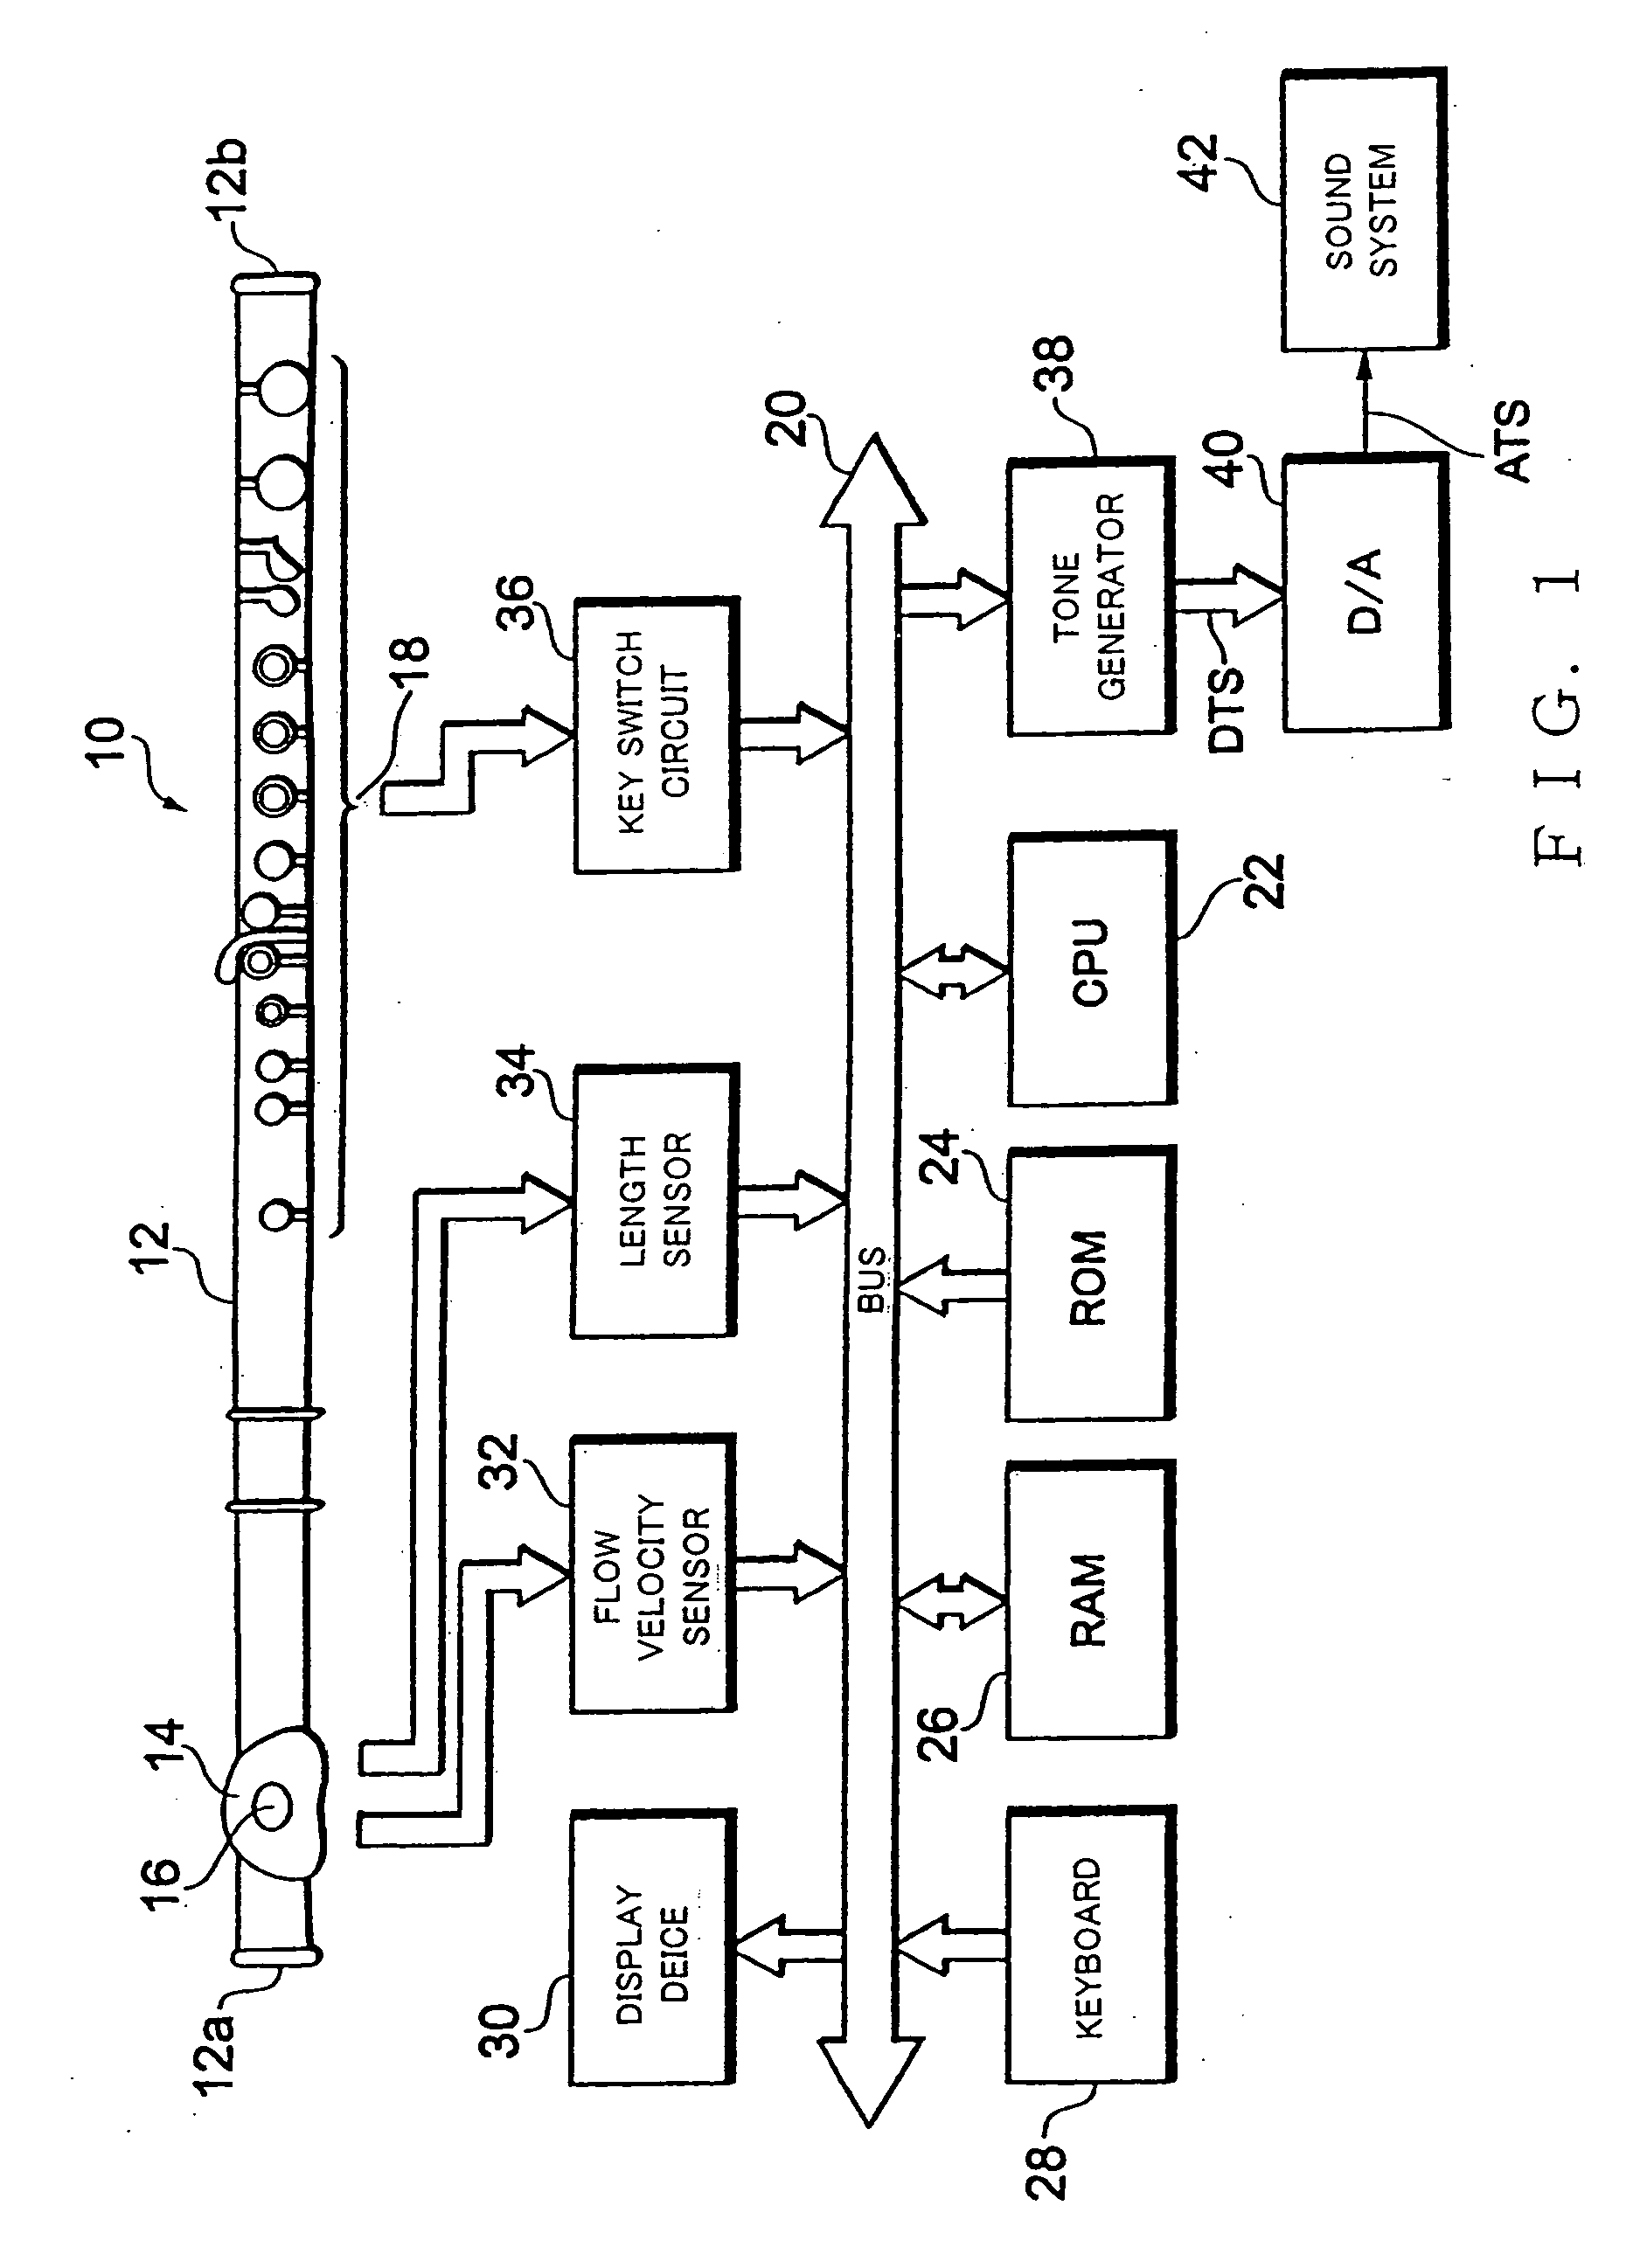 Tone generator control apparatus and program for electronic wind instrument